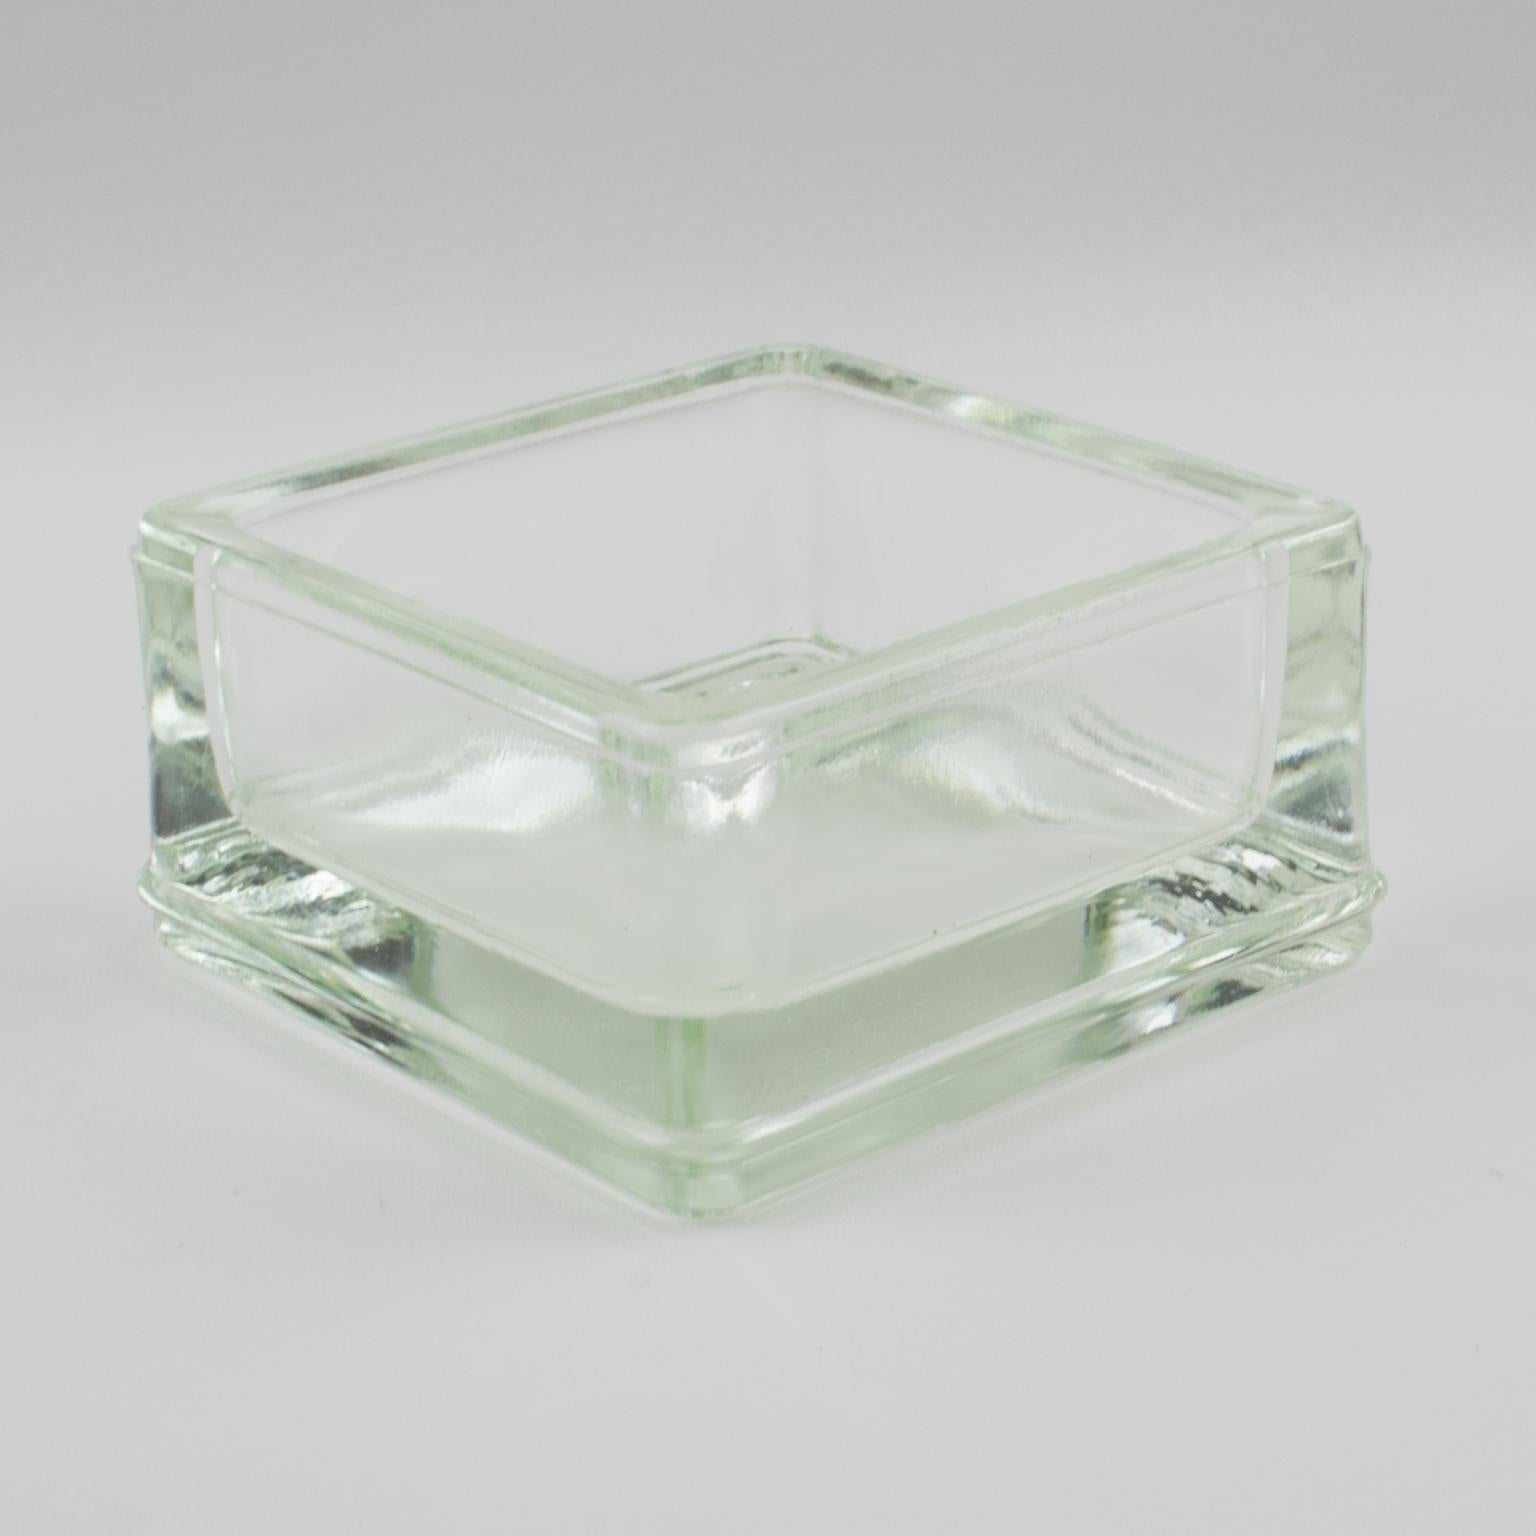 This 1950s industrial thick molded glass desktop accessory, designed by one of the most influential architects of the 20th century, Le Corbusier, is the perfect desk tidy, ashtray, or catchall. Manufactured by Lumax in France, this stylish and